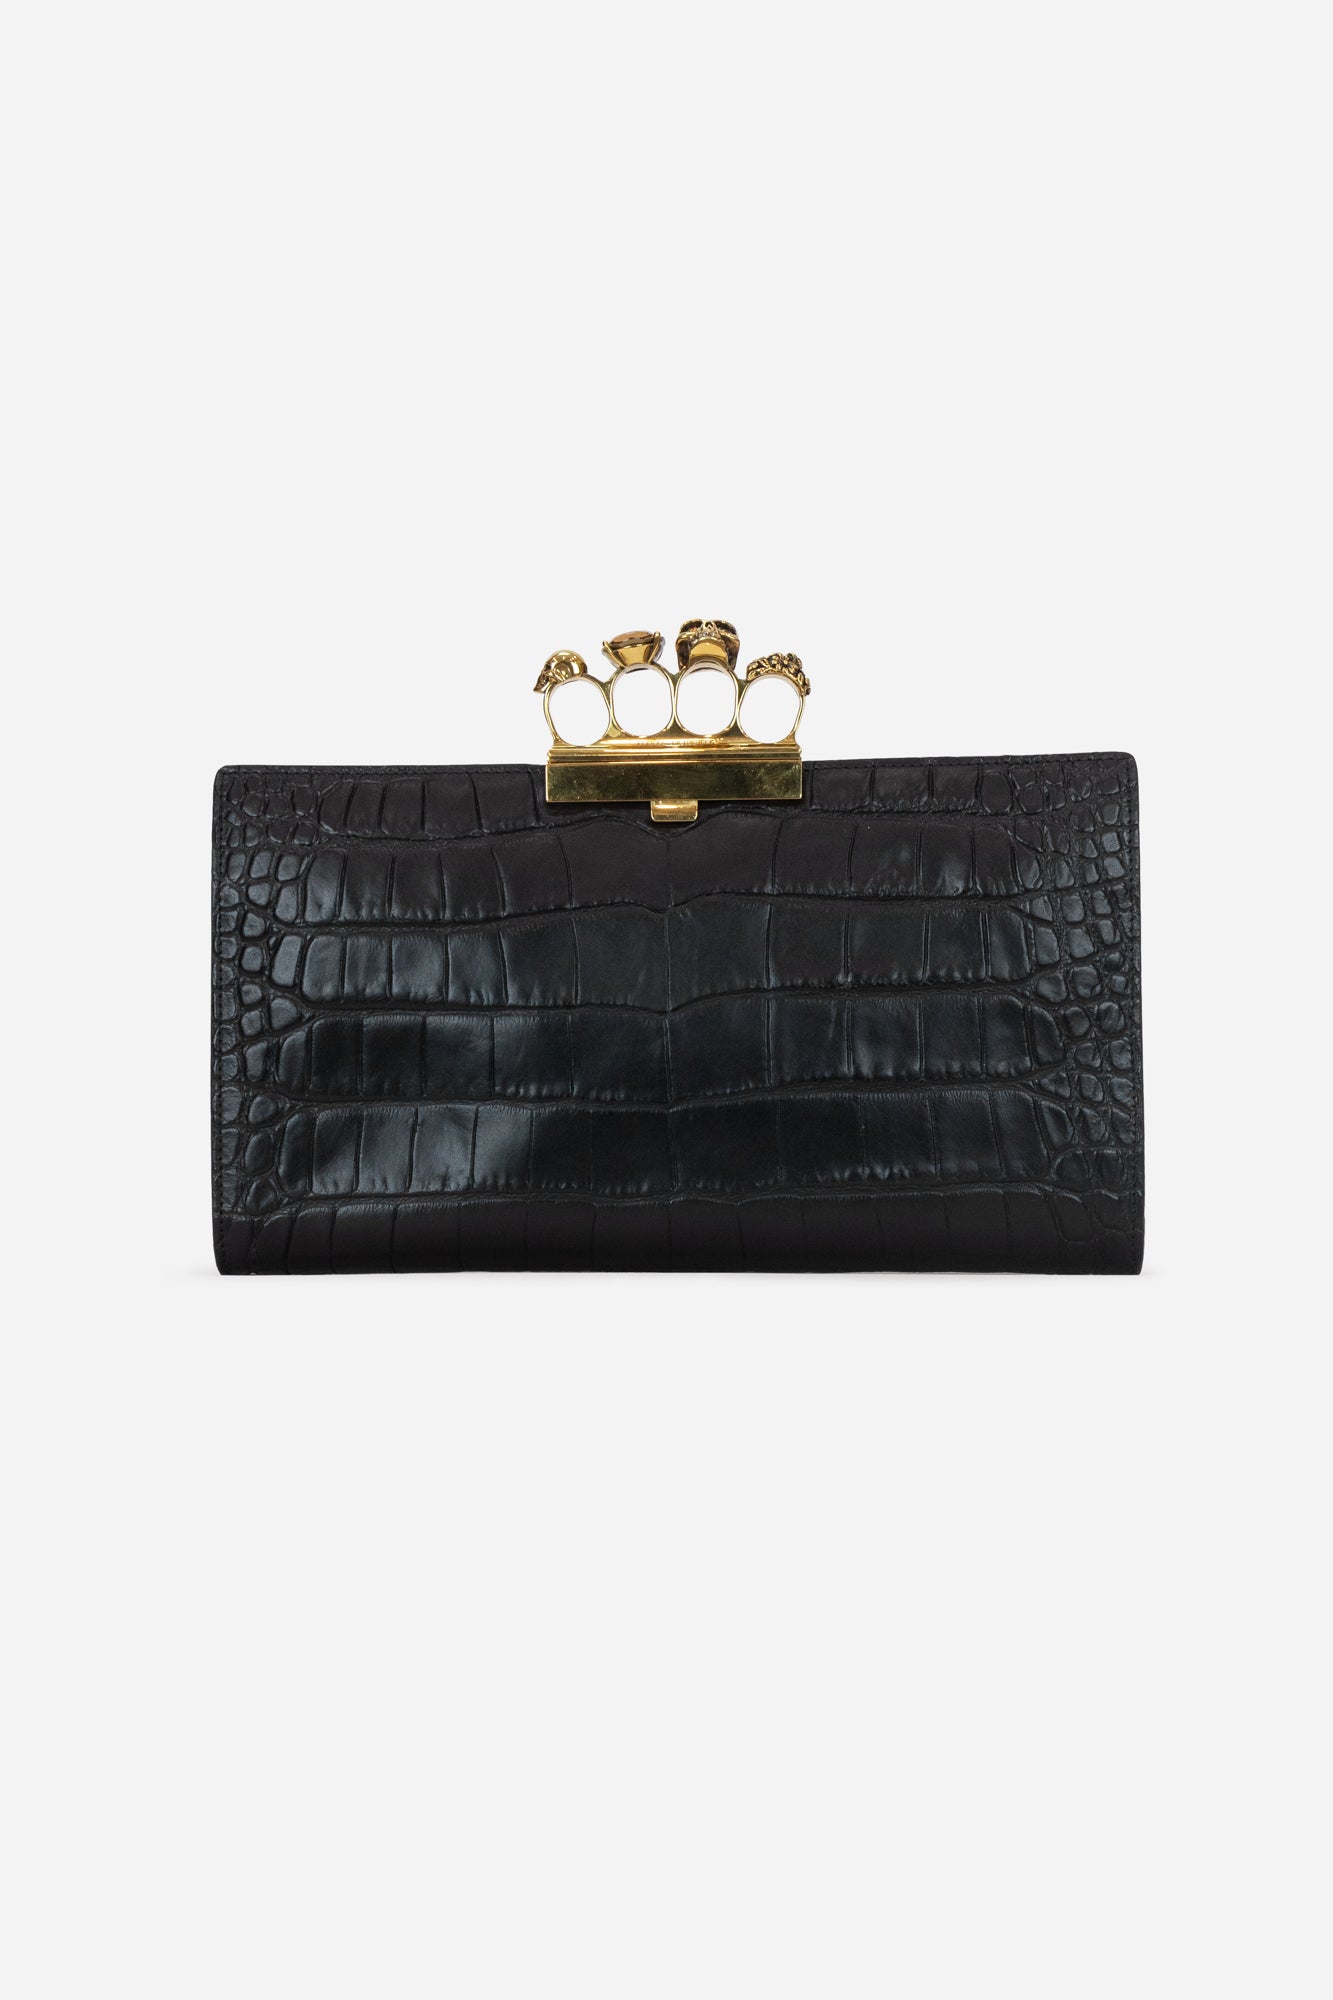 Black Aligator Clutch With Gold Nuckle Jems